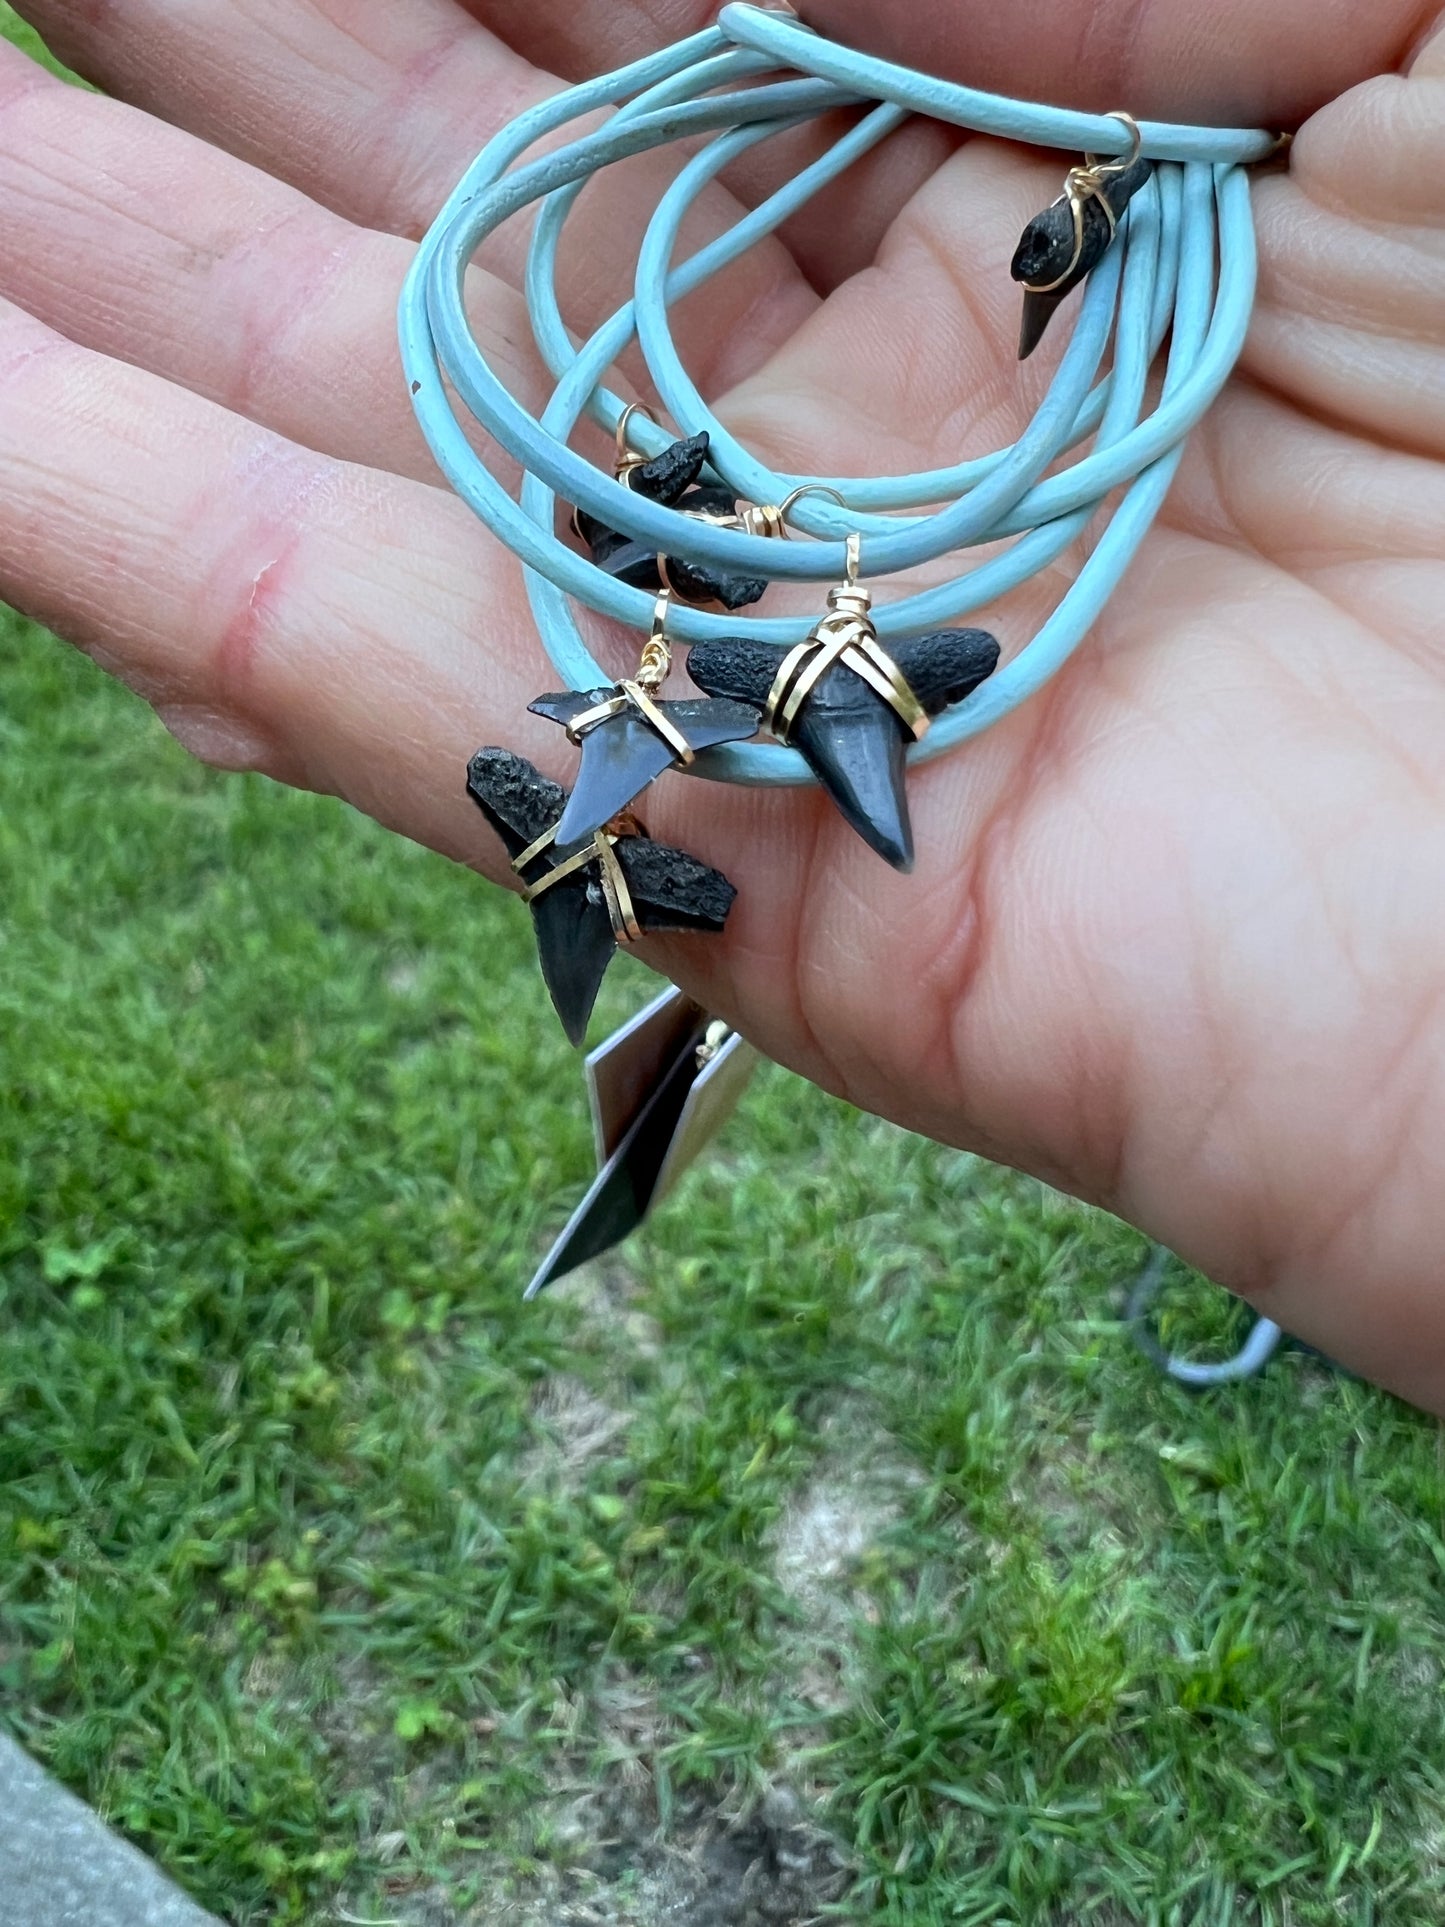 Leather Shark Tooth Necklace